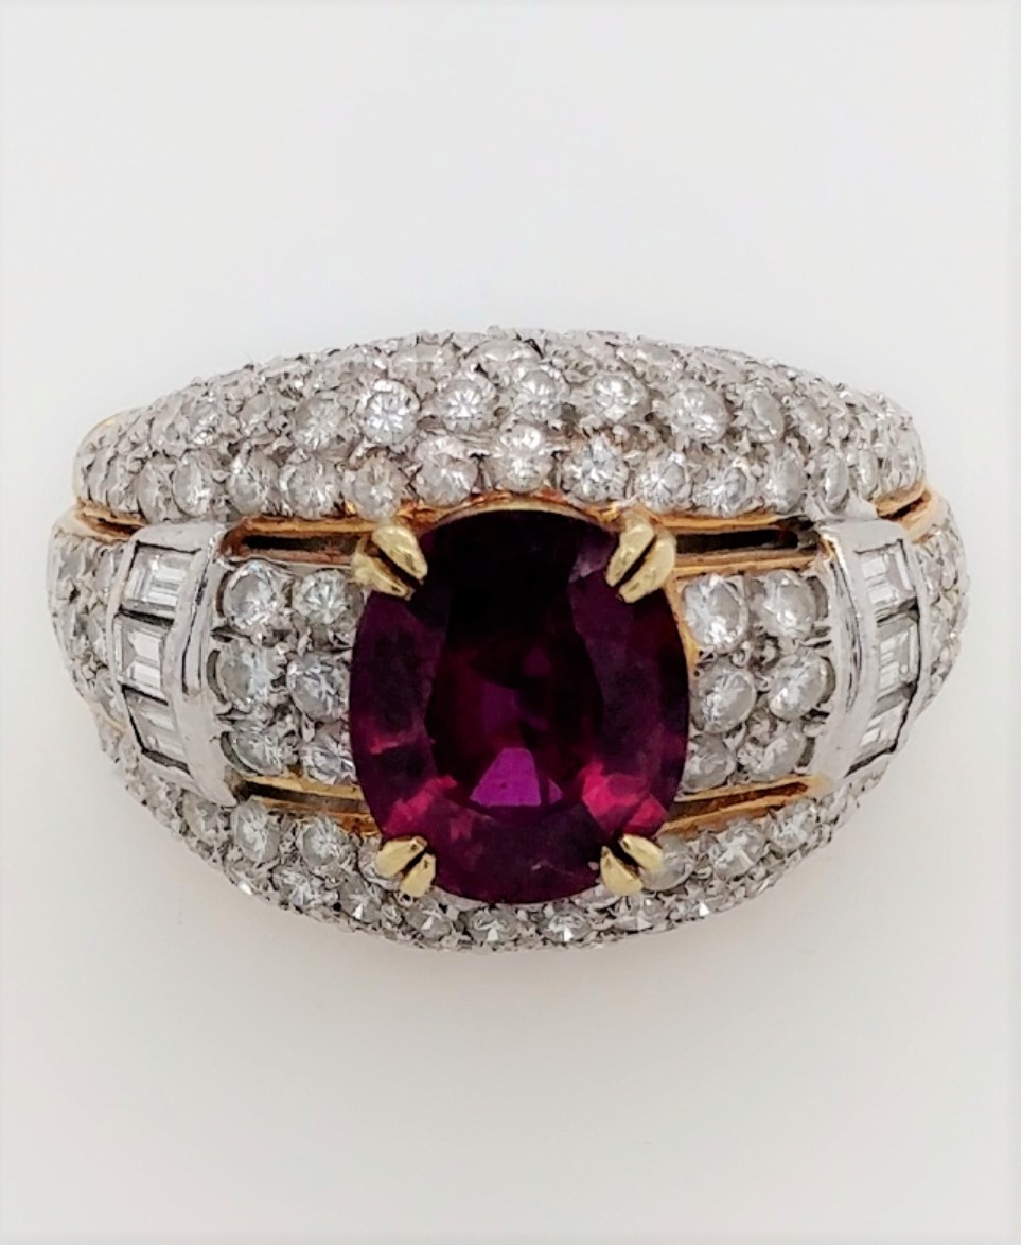 18K Yellow Gold Ring with 3.68 CT Ruby and 4.6CT of Diamonds
Adjustable for sizes 4-8